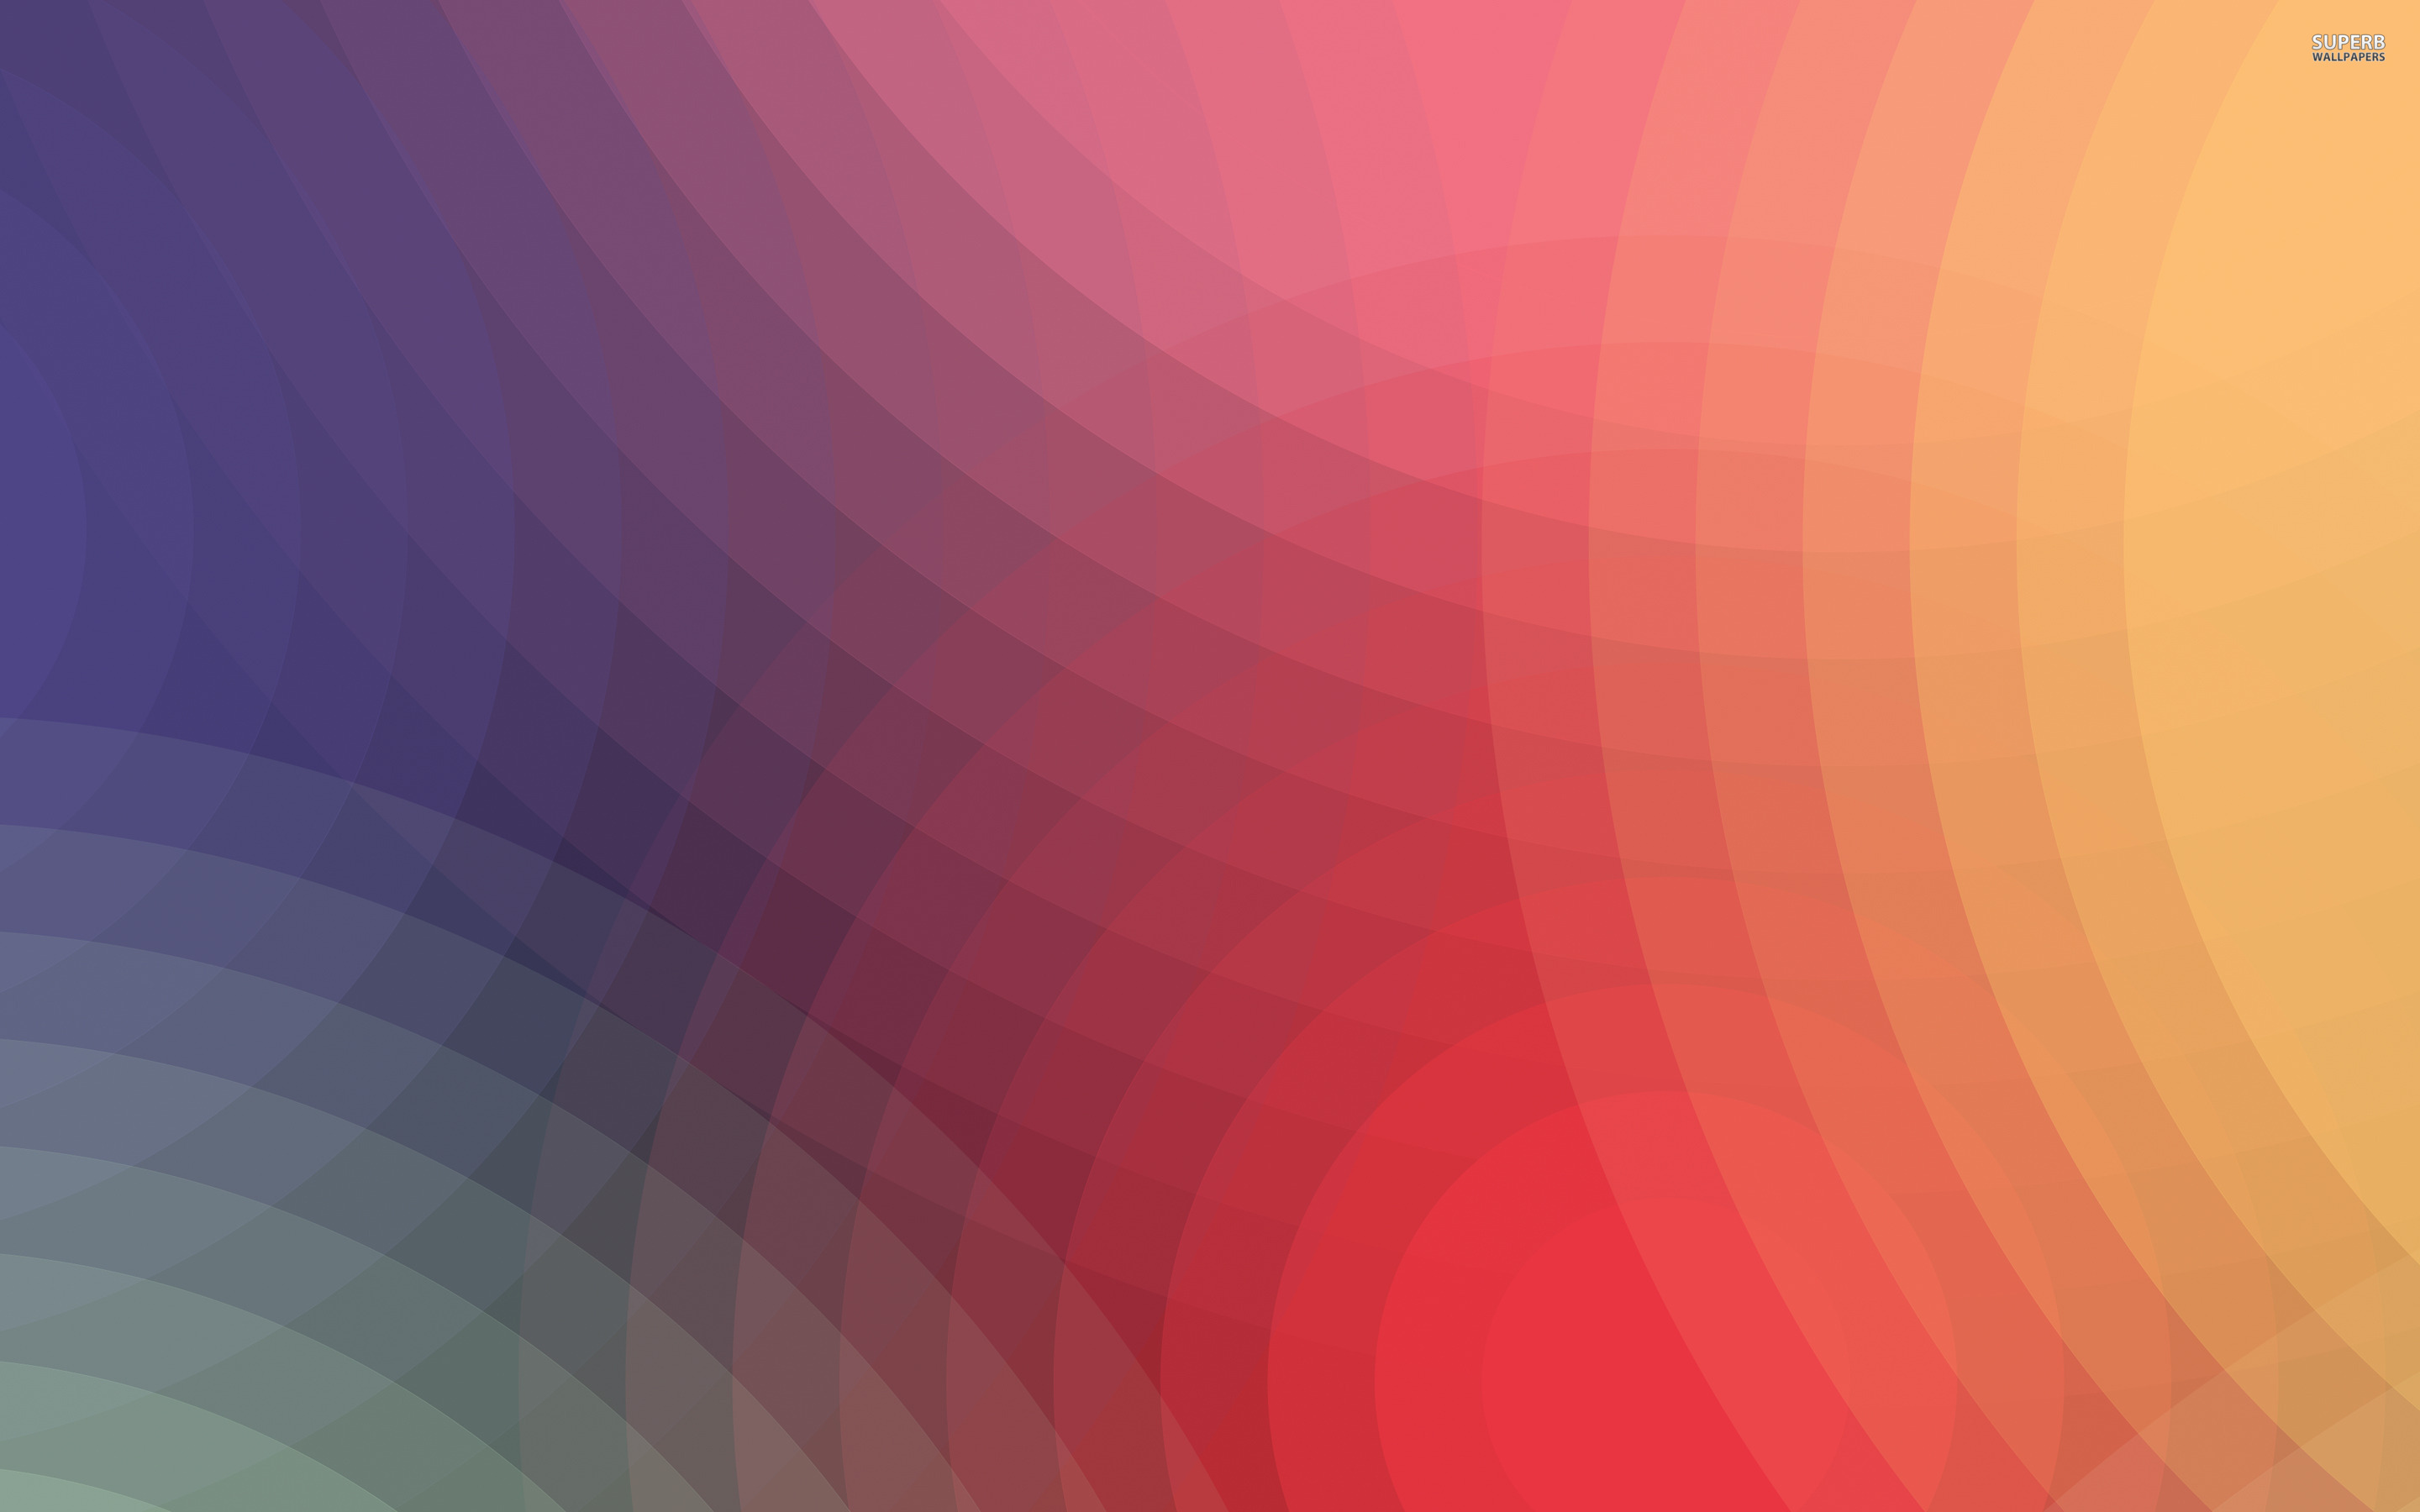 Rainbow colored circles : Desktop and mobile wallpaper : Wallippo